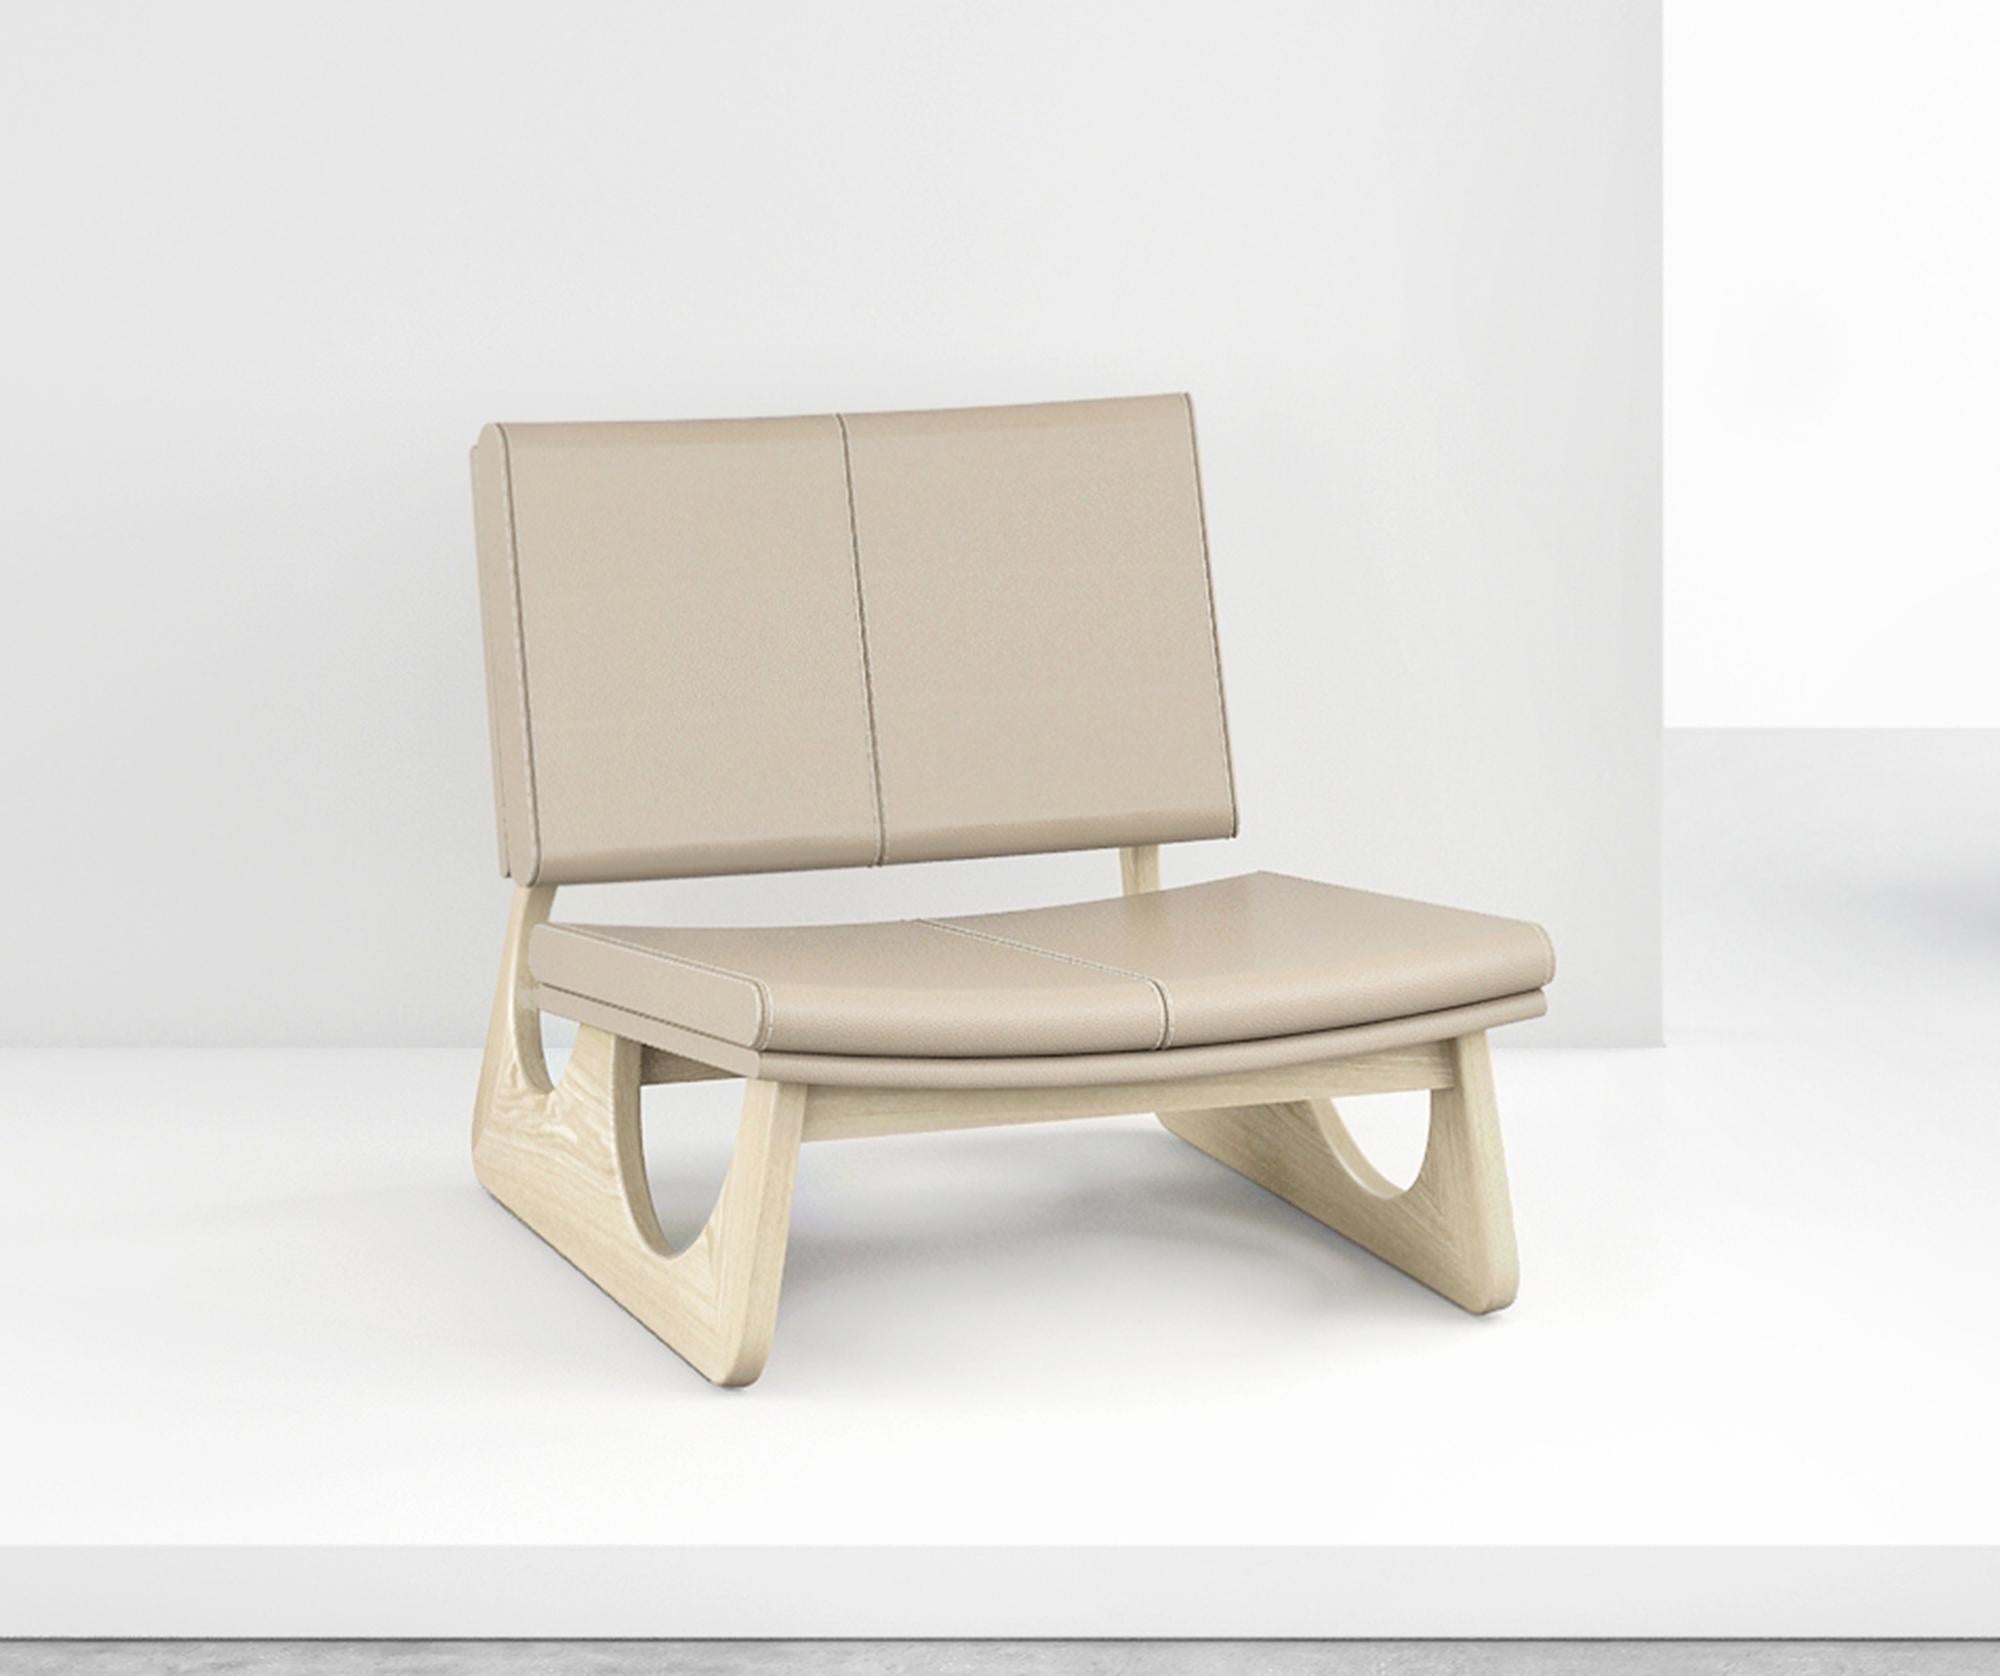 Recollecting childhood memories of playing outside on snowy winter days, the designers realized the low-slung Sledge chair, a liberally proportioned lounge chair that offers a cozy refuge indoors. One of studio’s earliest creations, Sledge lounge